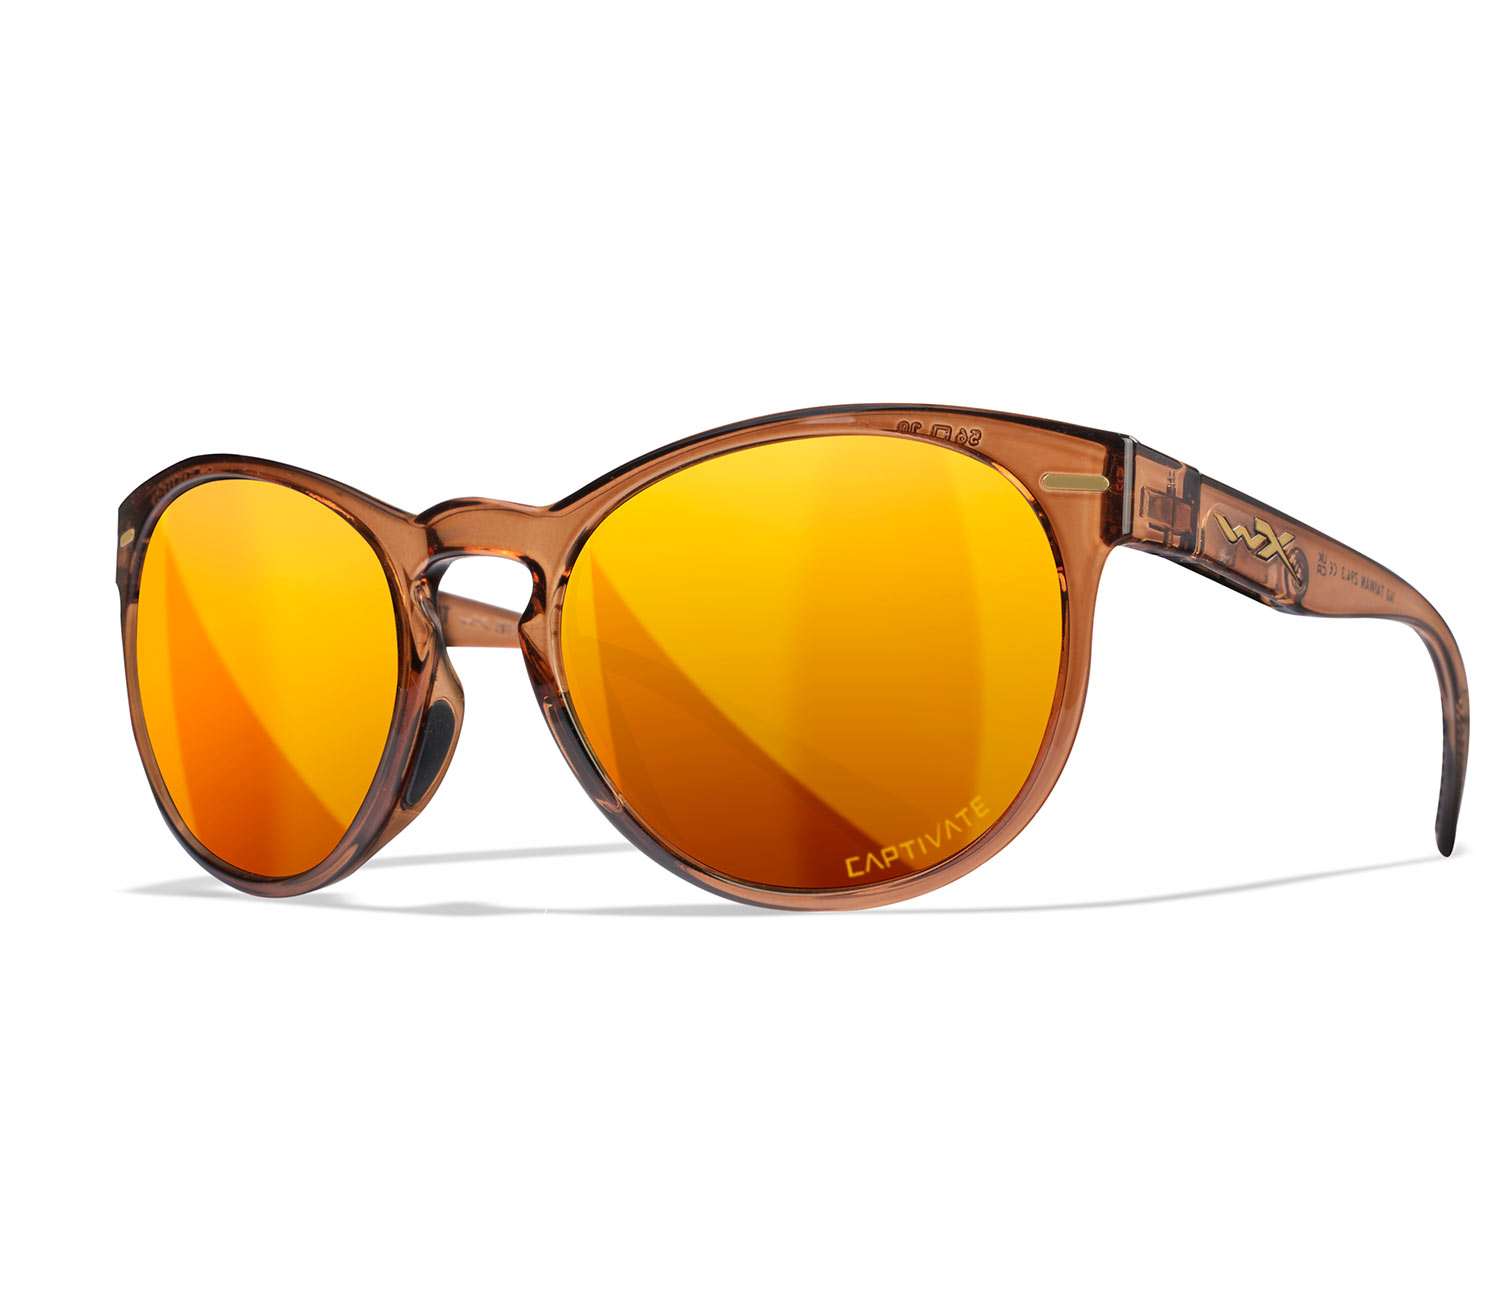 Gafas Wiley X Covert Captivate Bronze Mirror Crystal Rootbeer